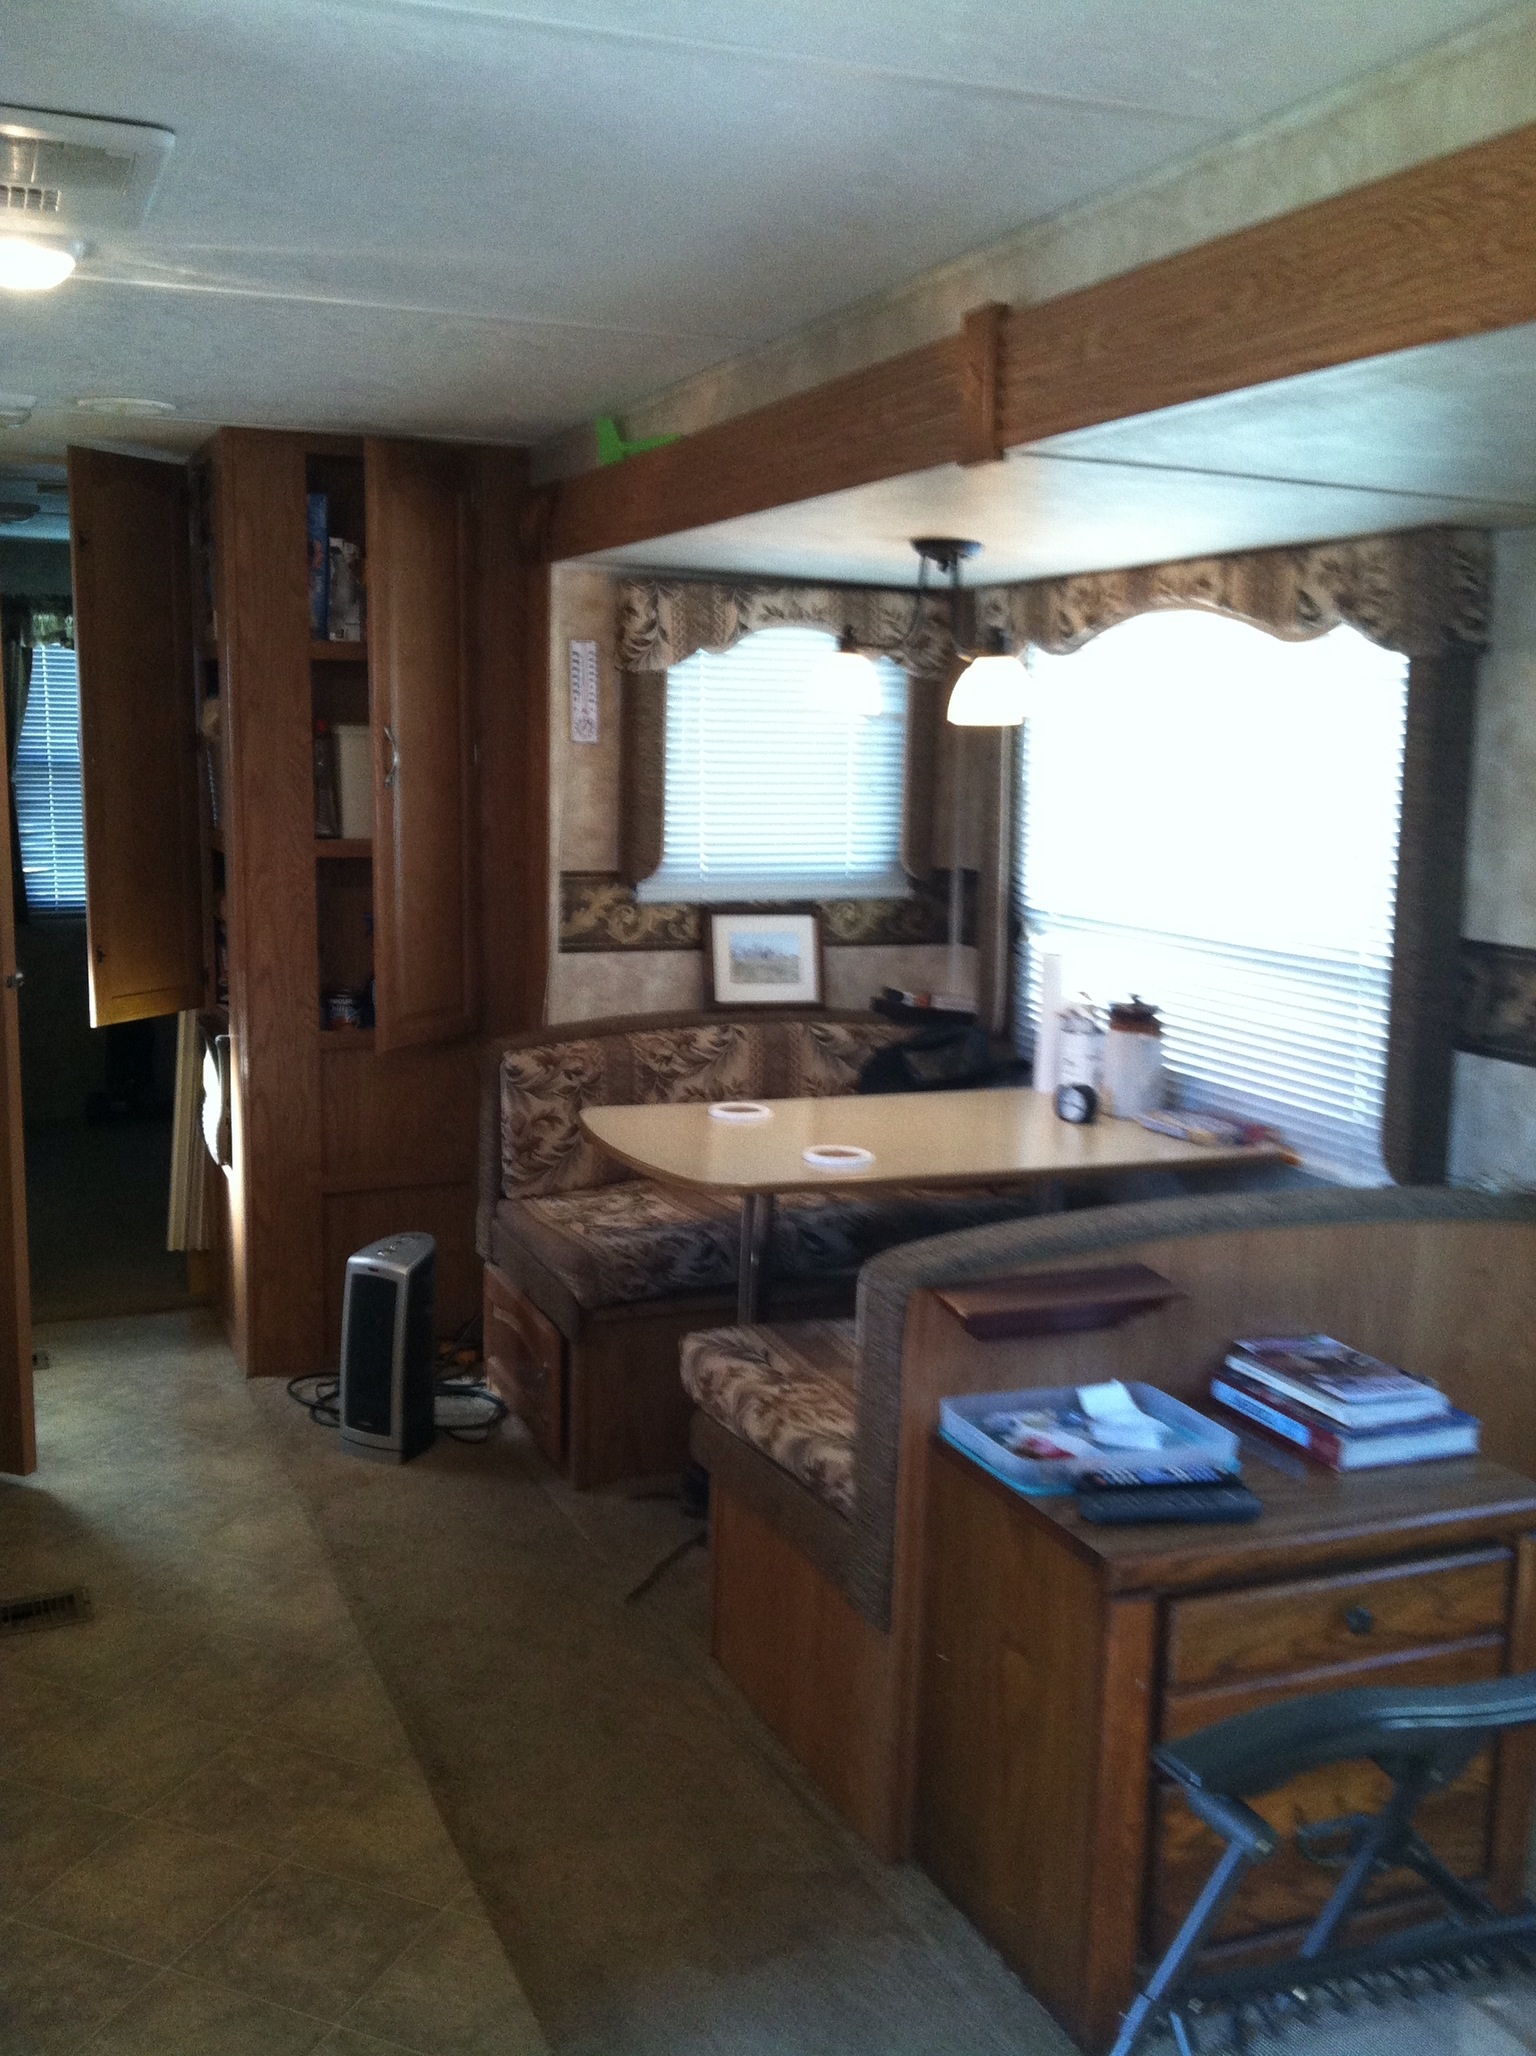 2007 Copper Canyon Sprinter 31ft pull behind camper